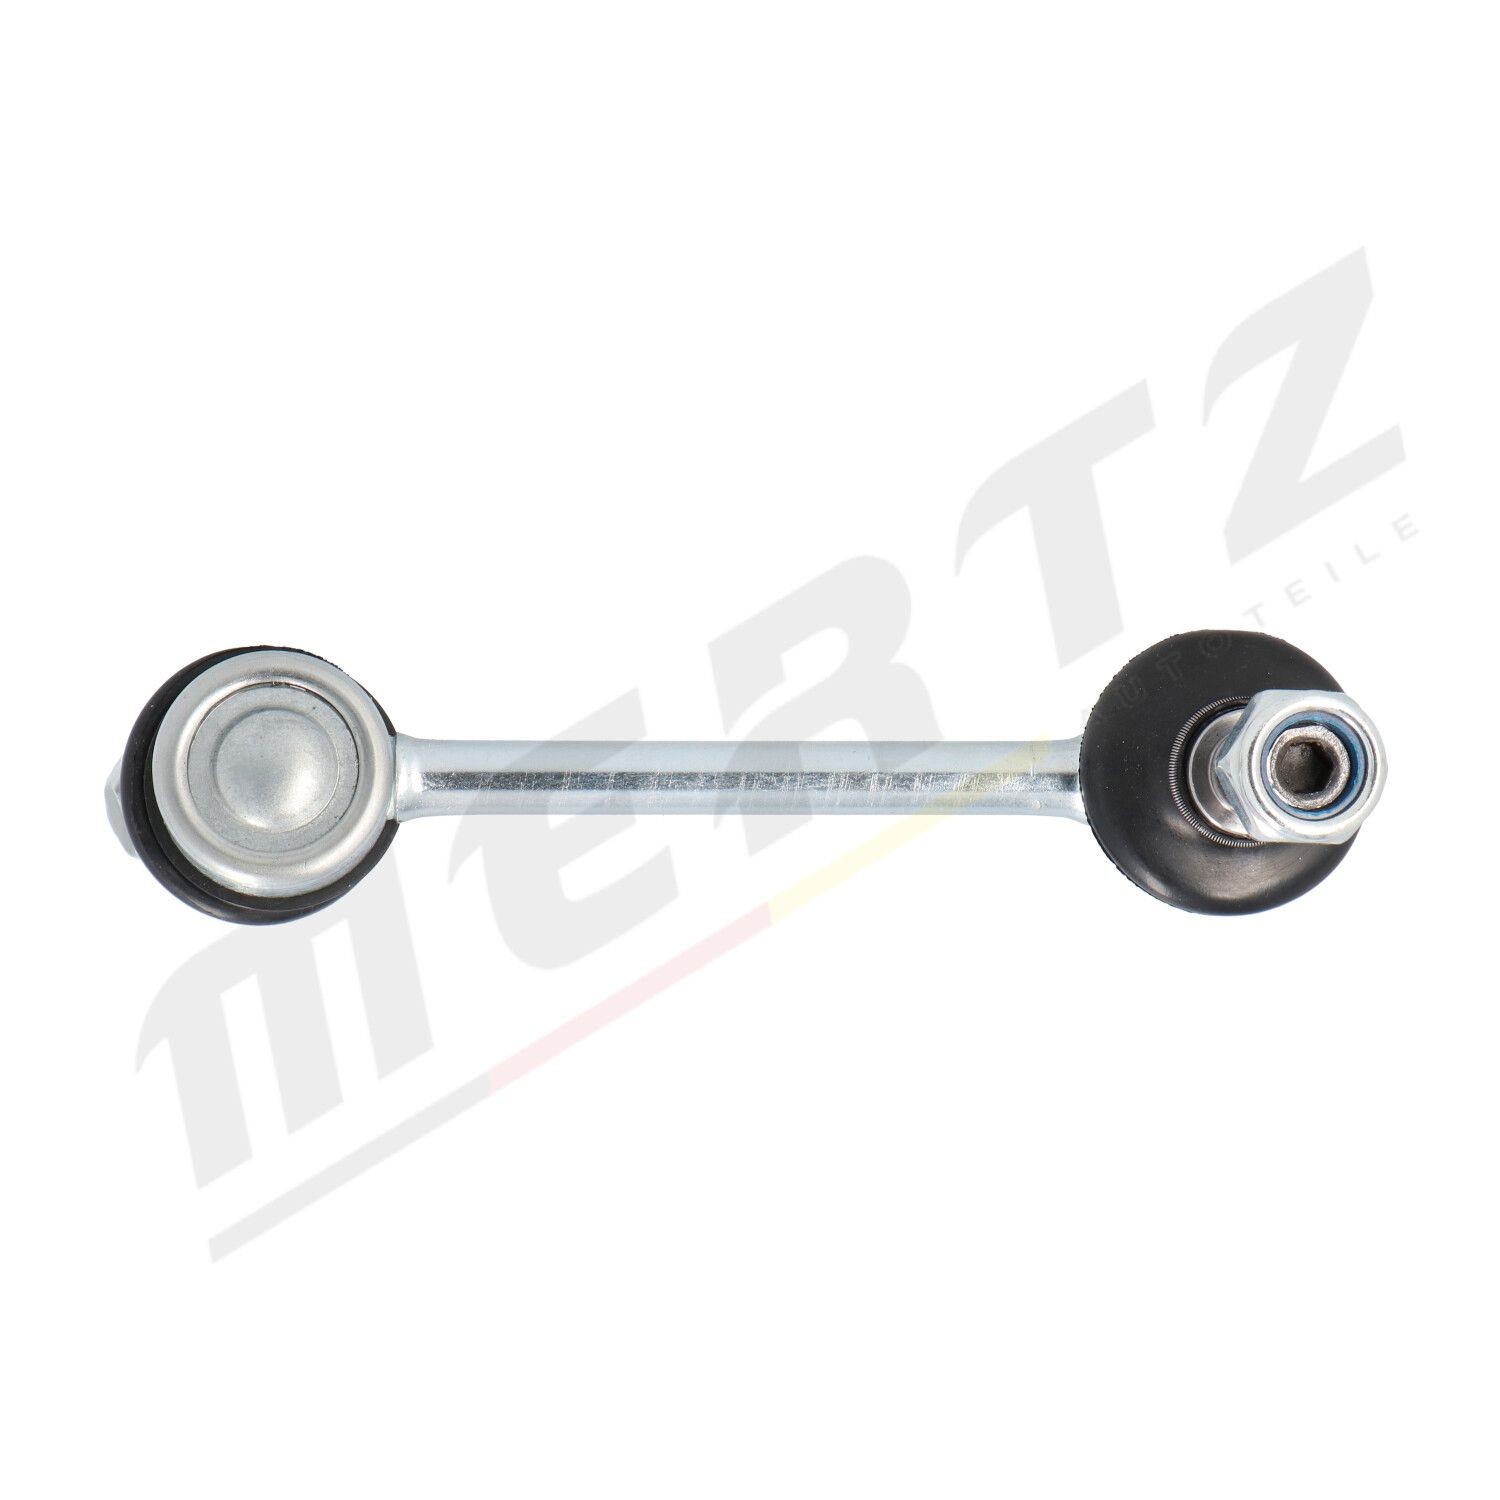 MERTZ Front Axle Left, Front Axle Right, 129mm, M12x1,25 , with nut, Steel Length: 129mm Drop link M-S1764 buy